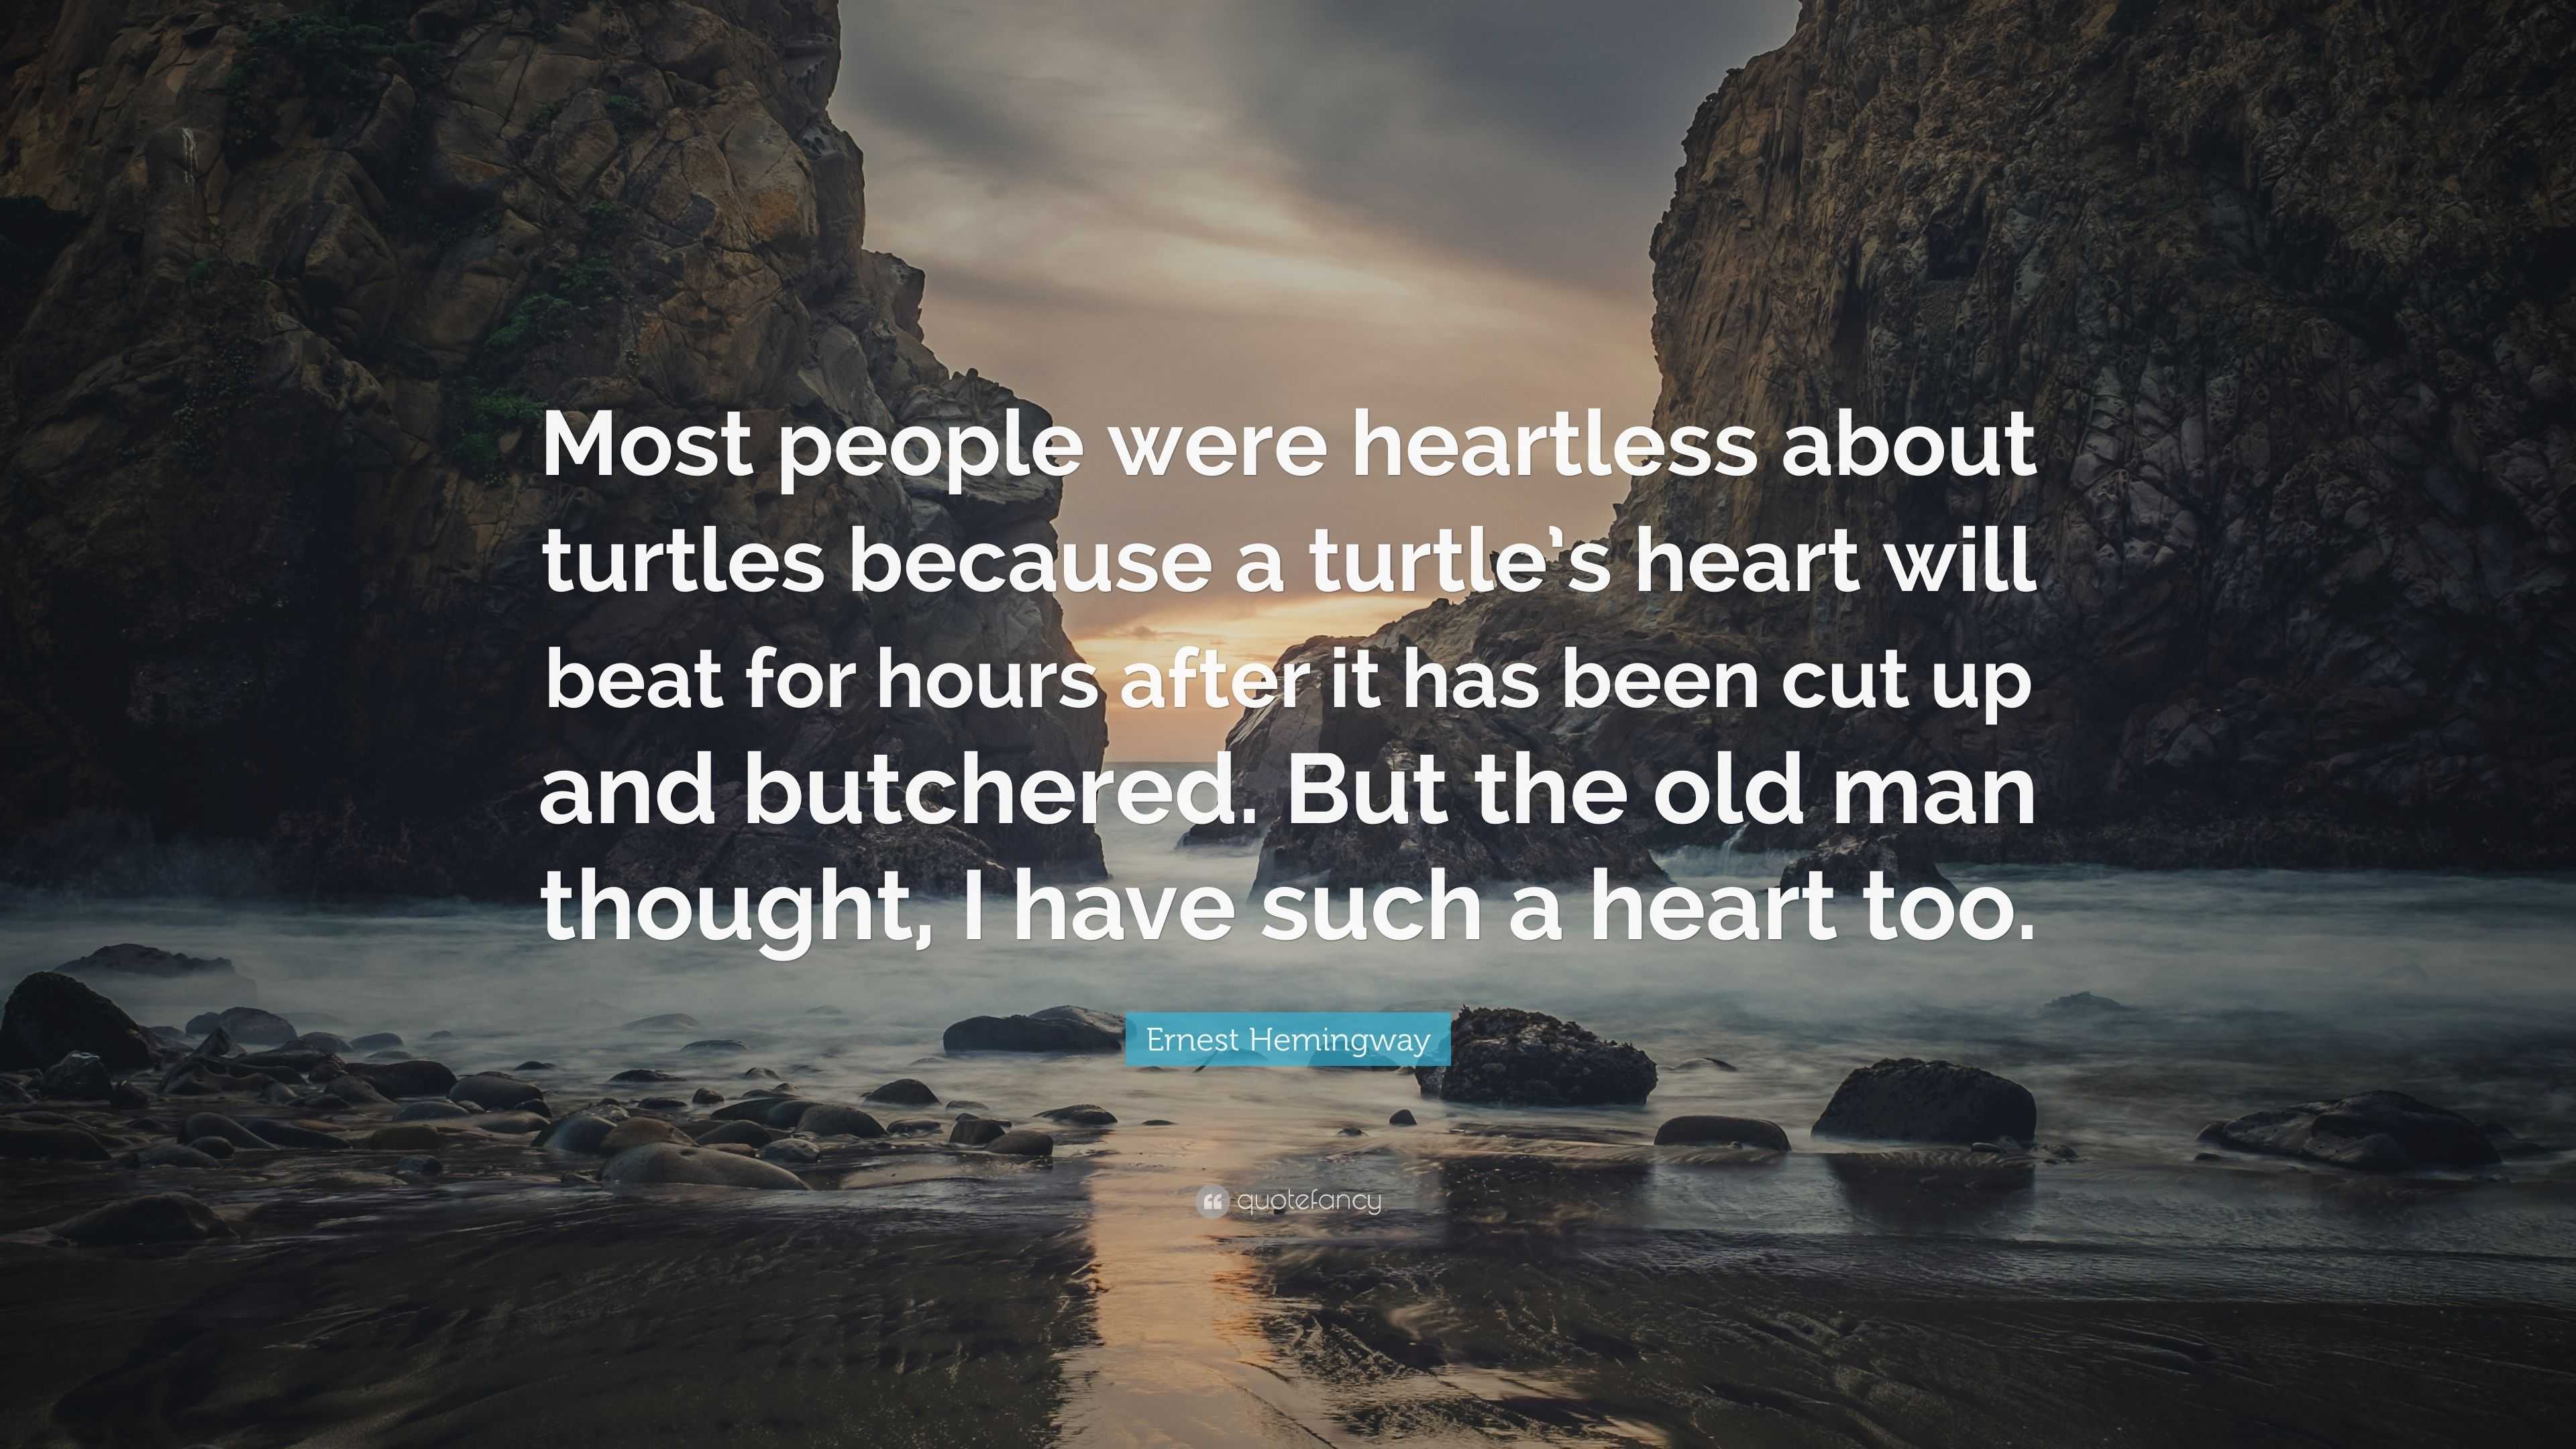 Ernest Hemingway Quote: "Most people were heartless about turtles because a turtle's heart will ...